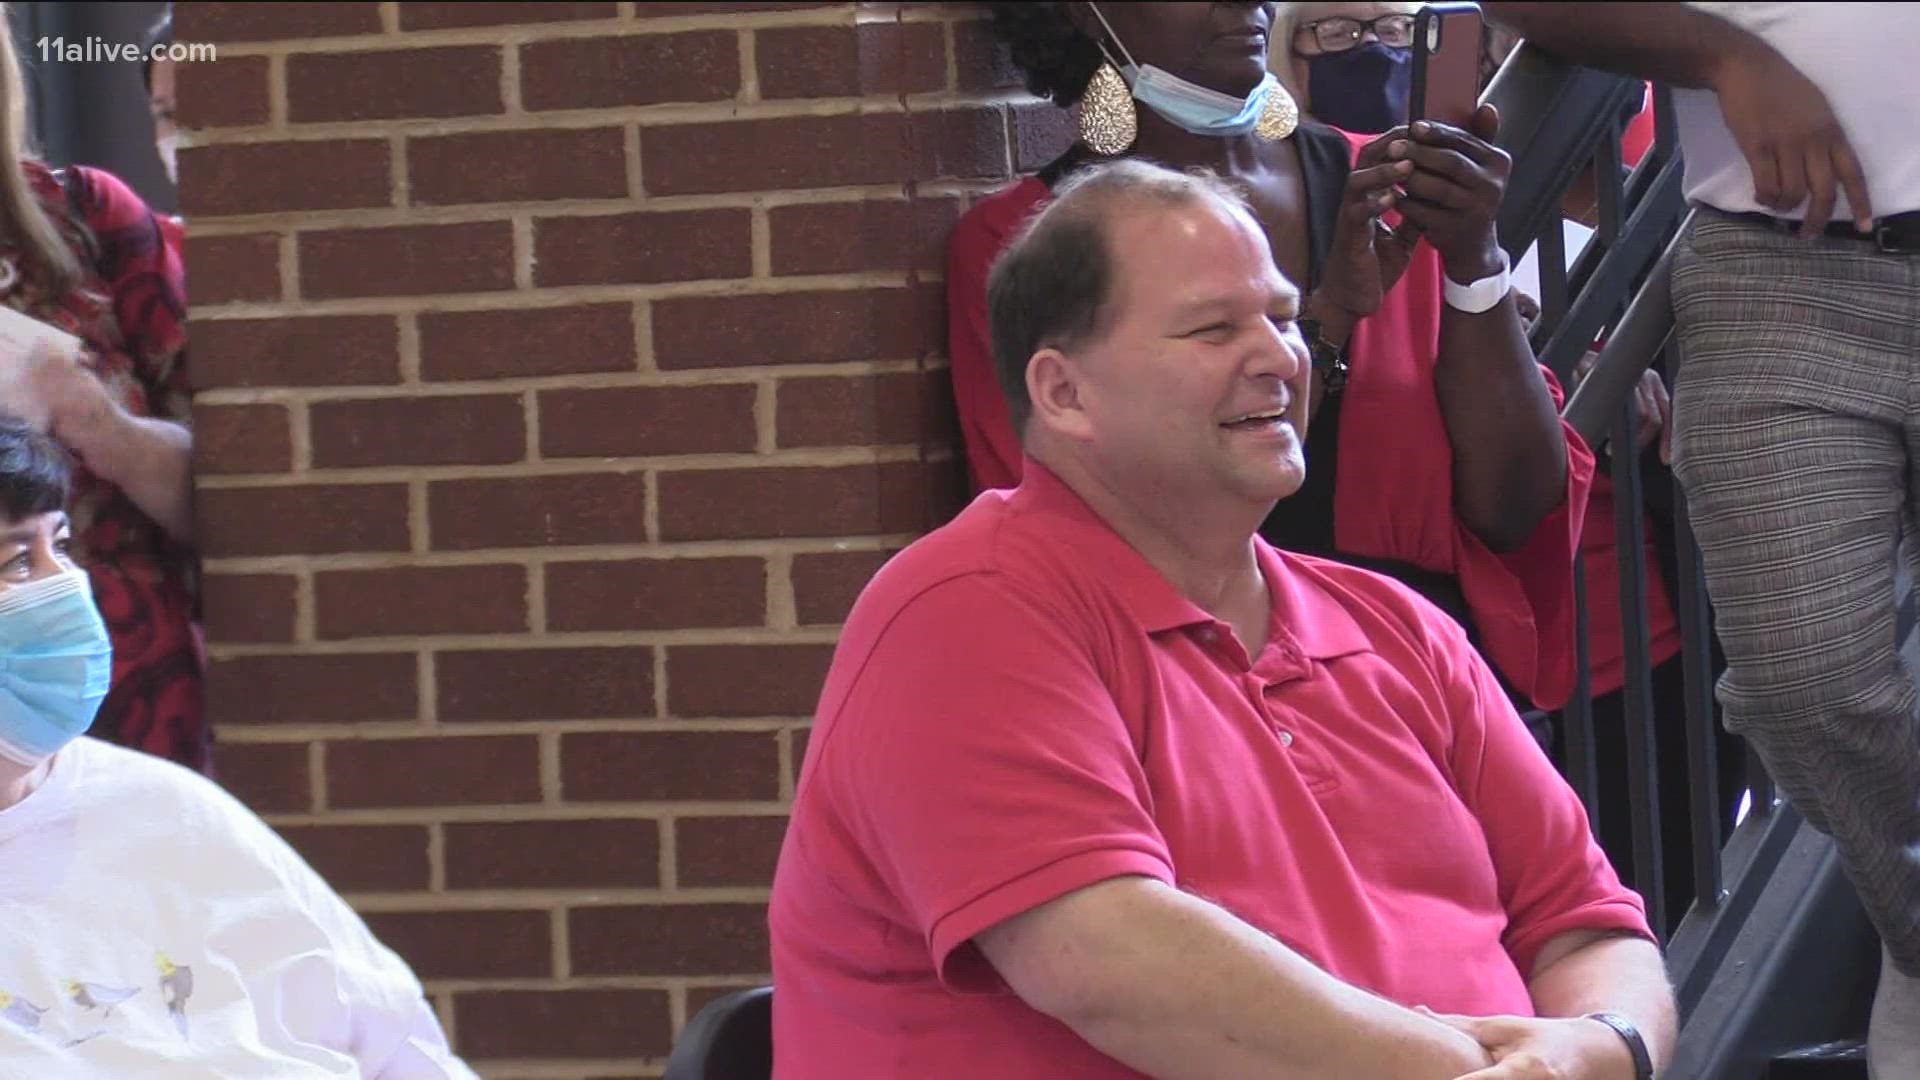 James Stephen Skinner is celebrating three decades of service at a Cobb County school.